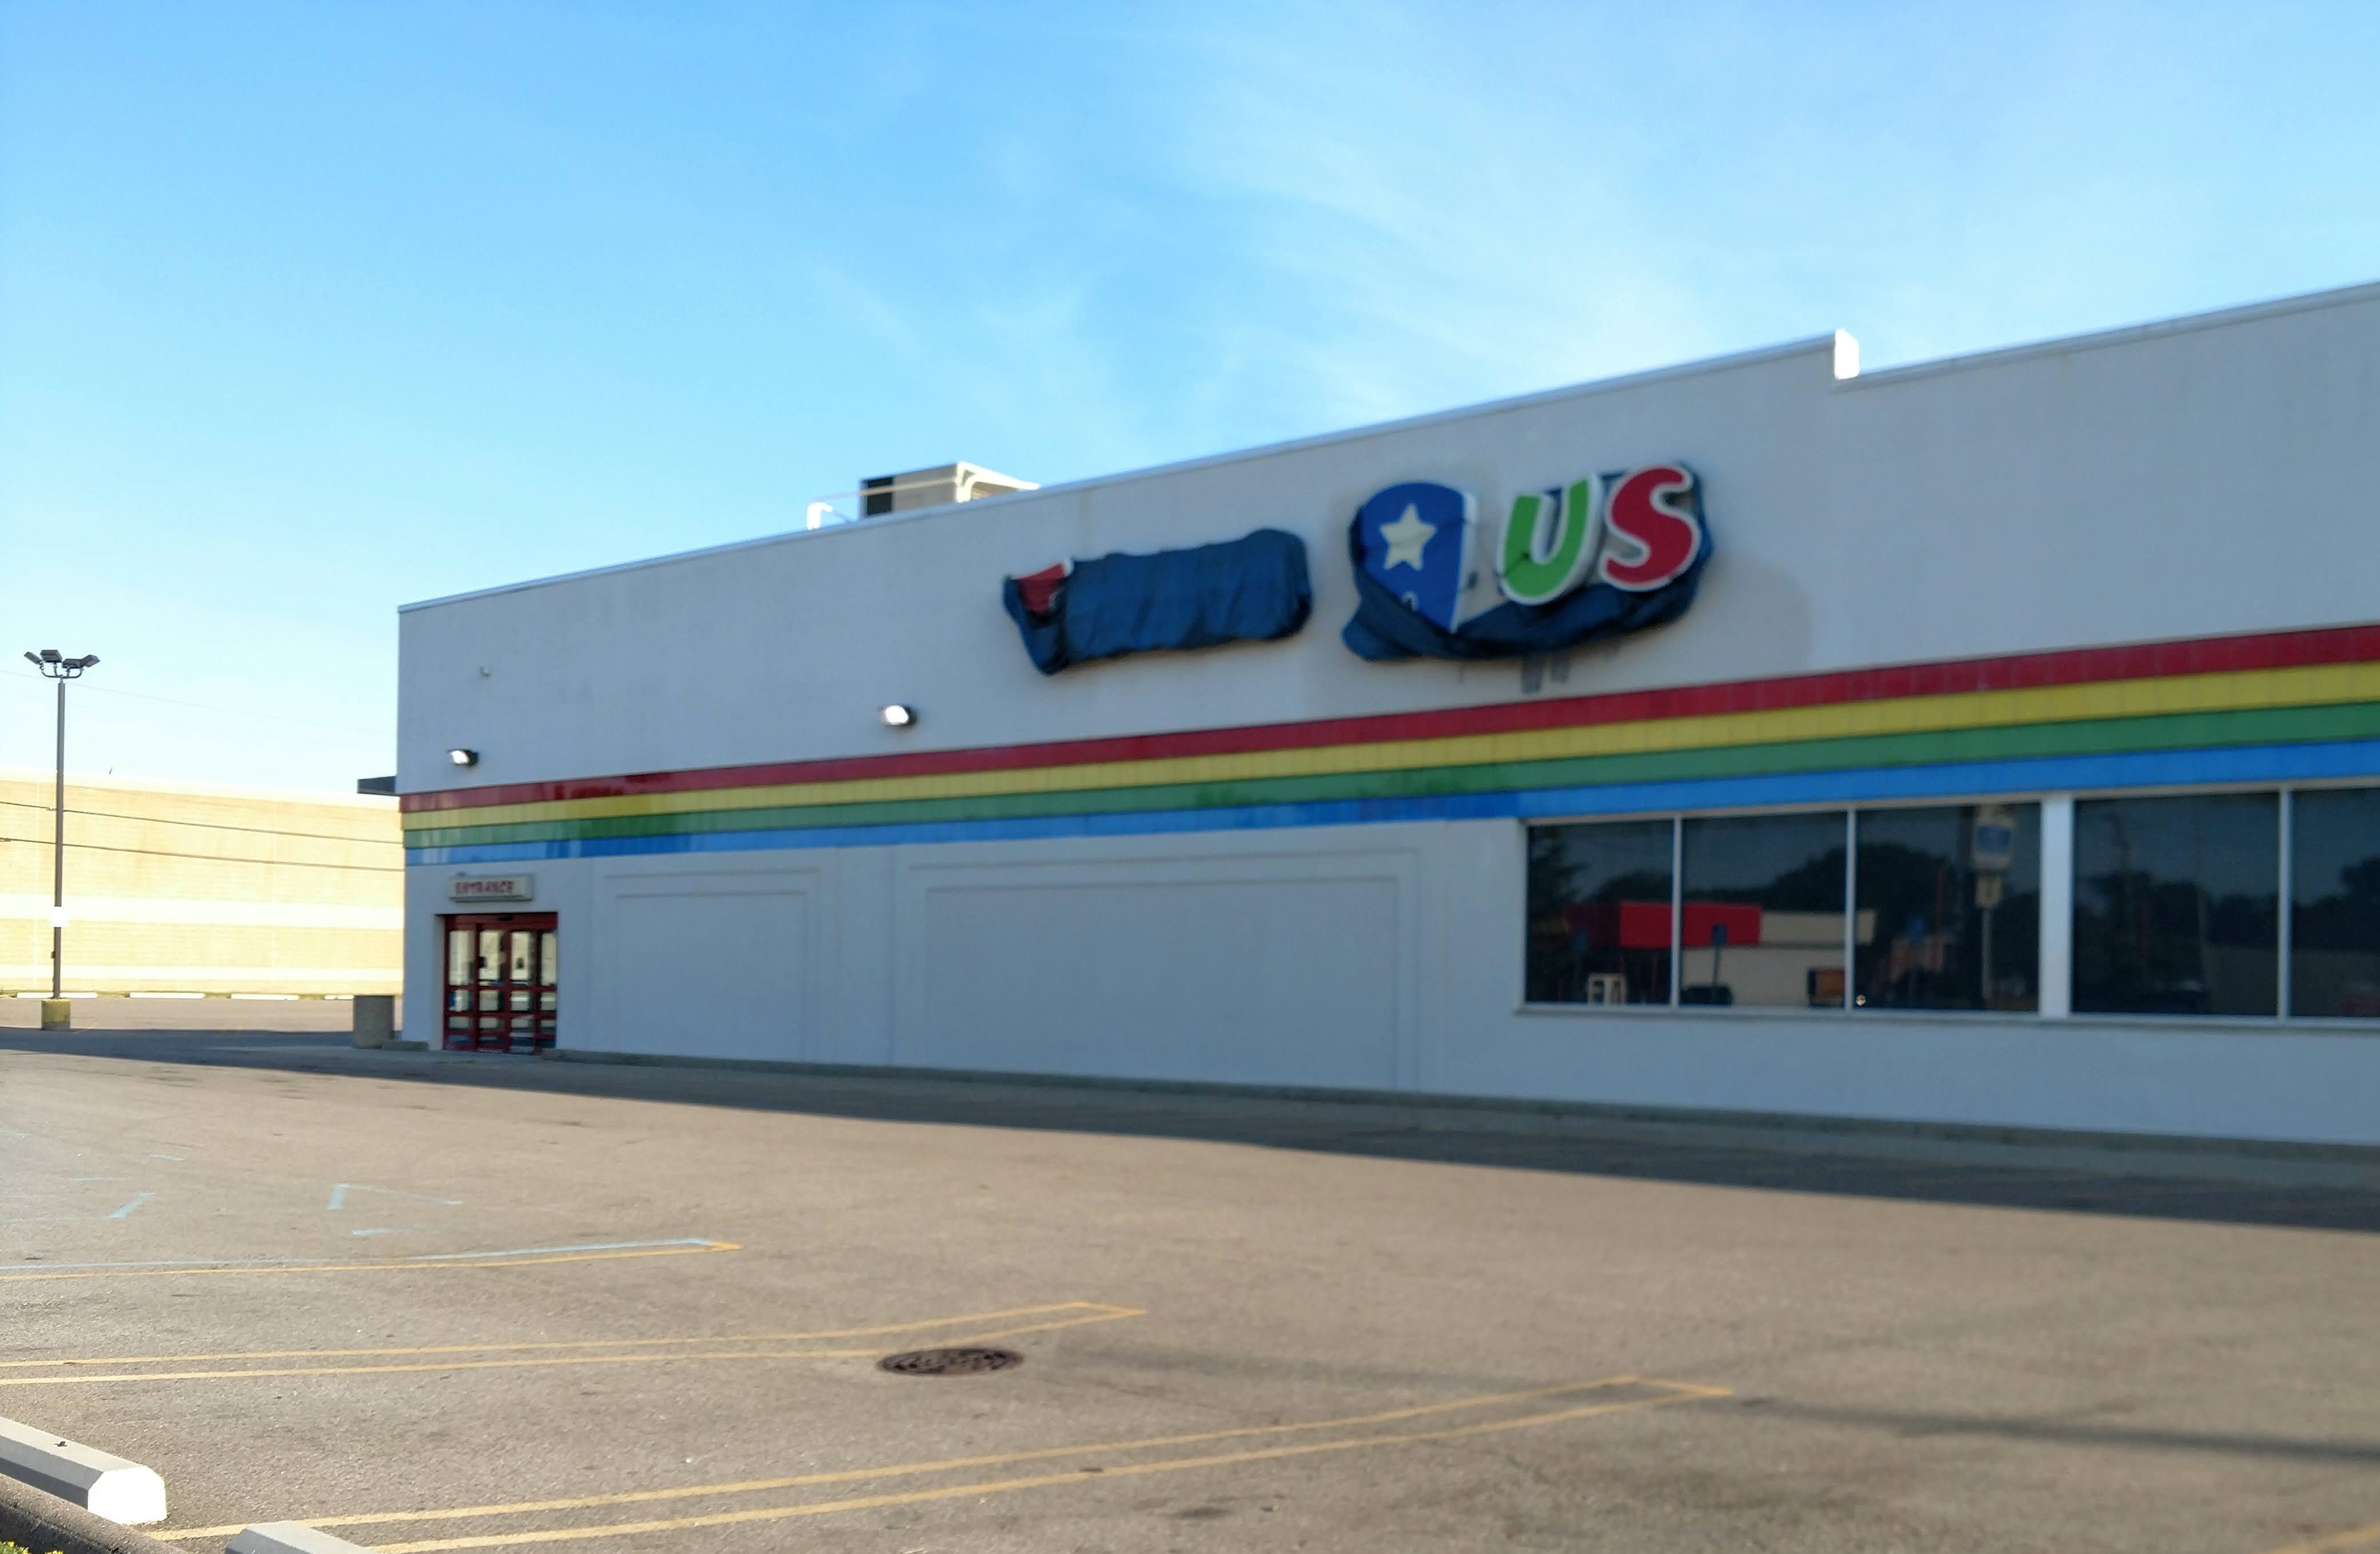 toys r us locations in clinton md